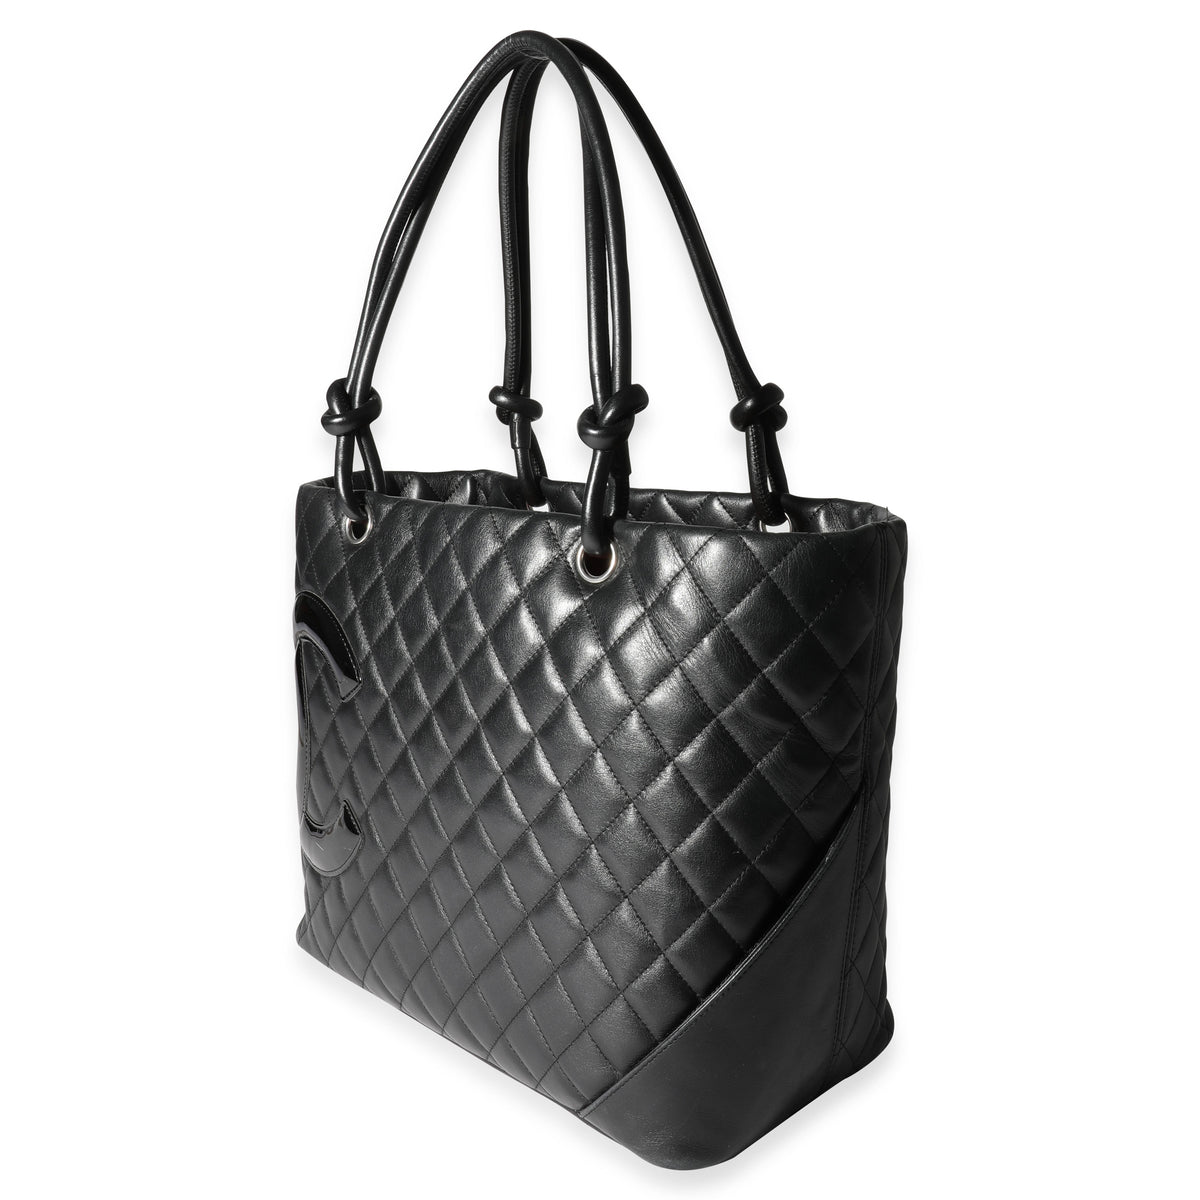 CHANEL Black Quilted Leather Large Cambon Tote Bag